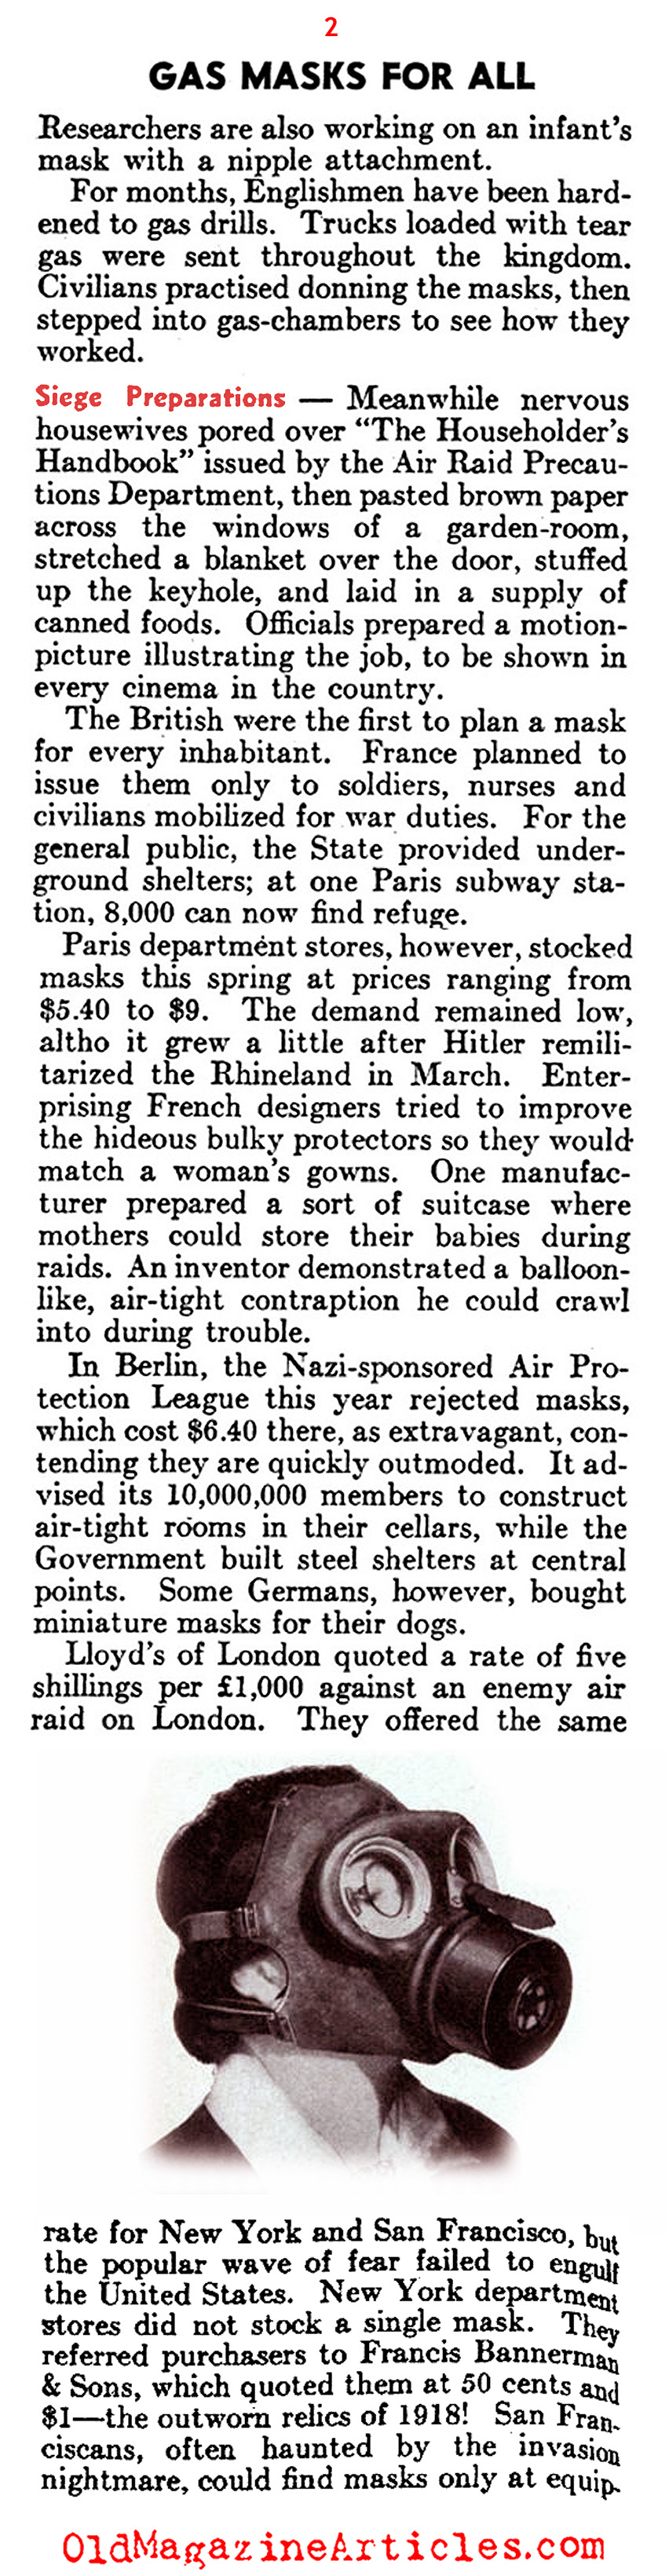 British Civilians Trained to Use Gas Masks (The Literary Digest, 1936)